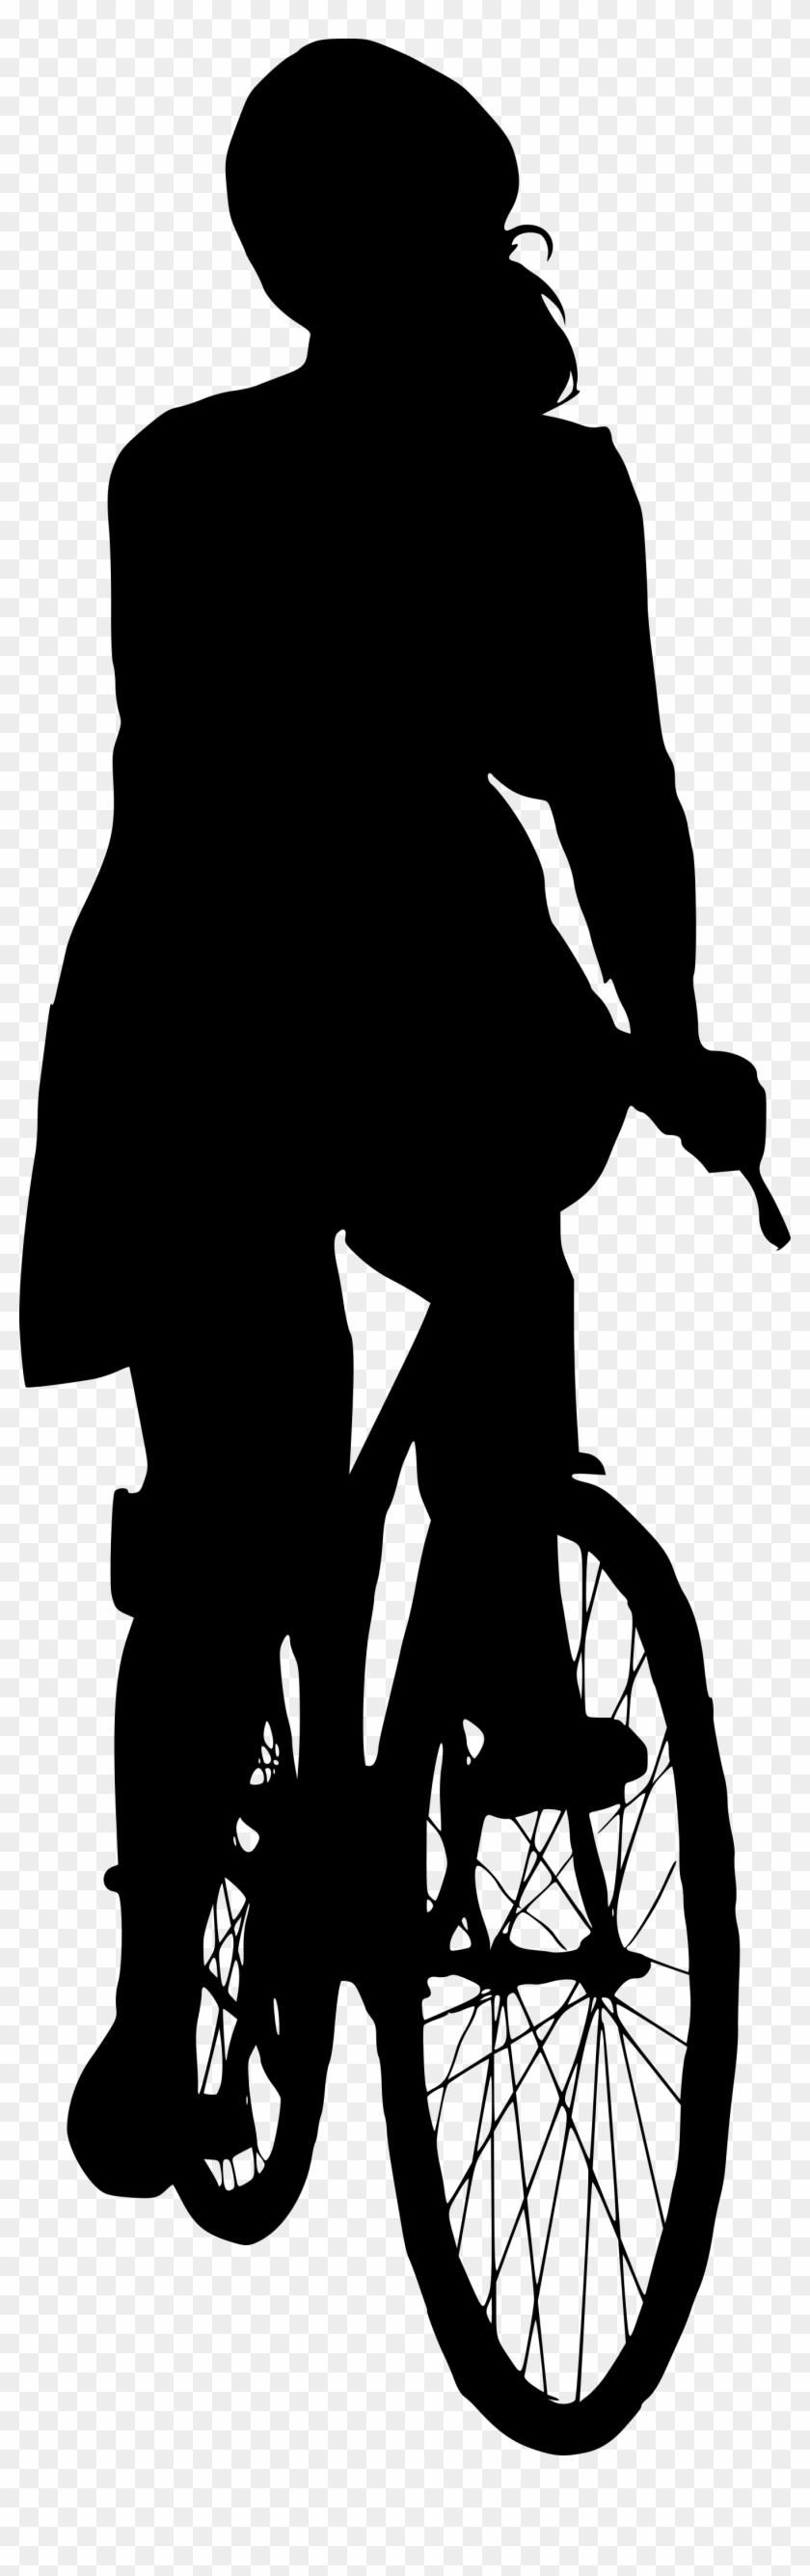 6 Bicycle Ride Silhouette Front View - Bicycle Png Front #418497